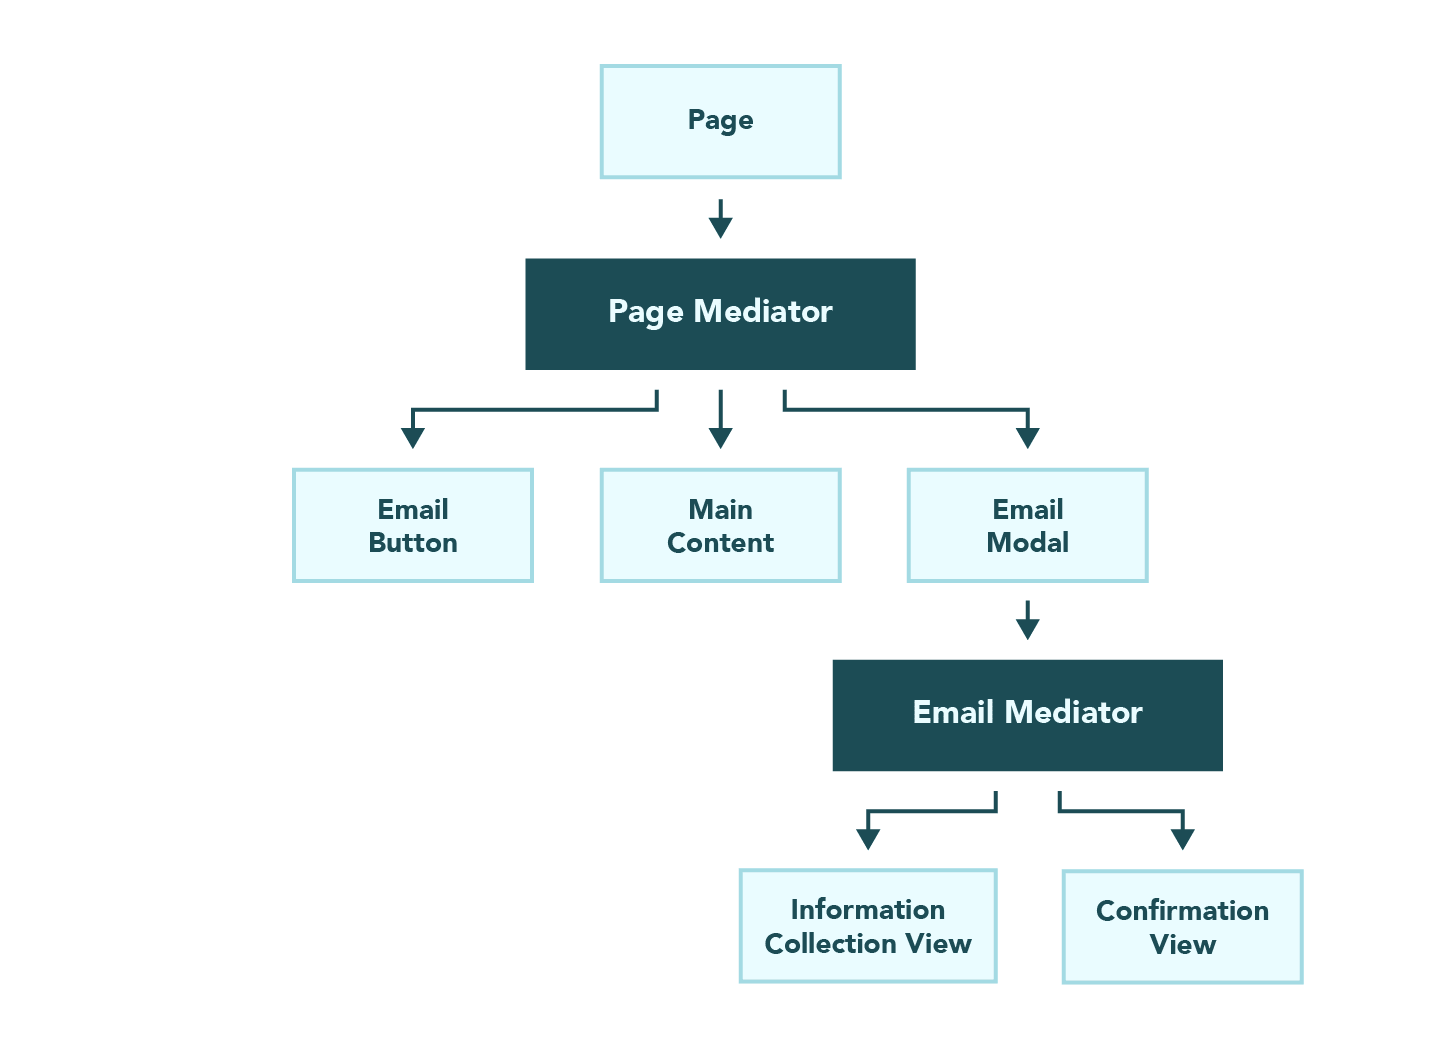 Architectural diagram of the mediator pattern